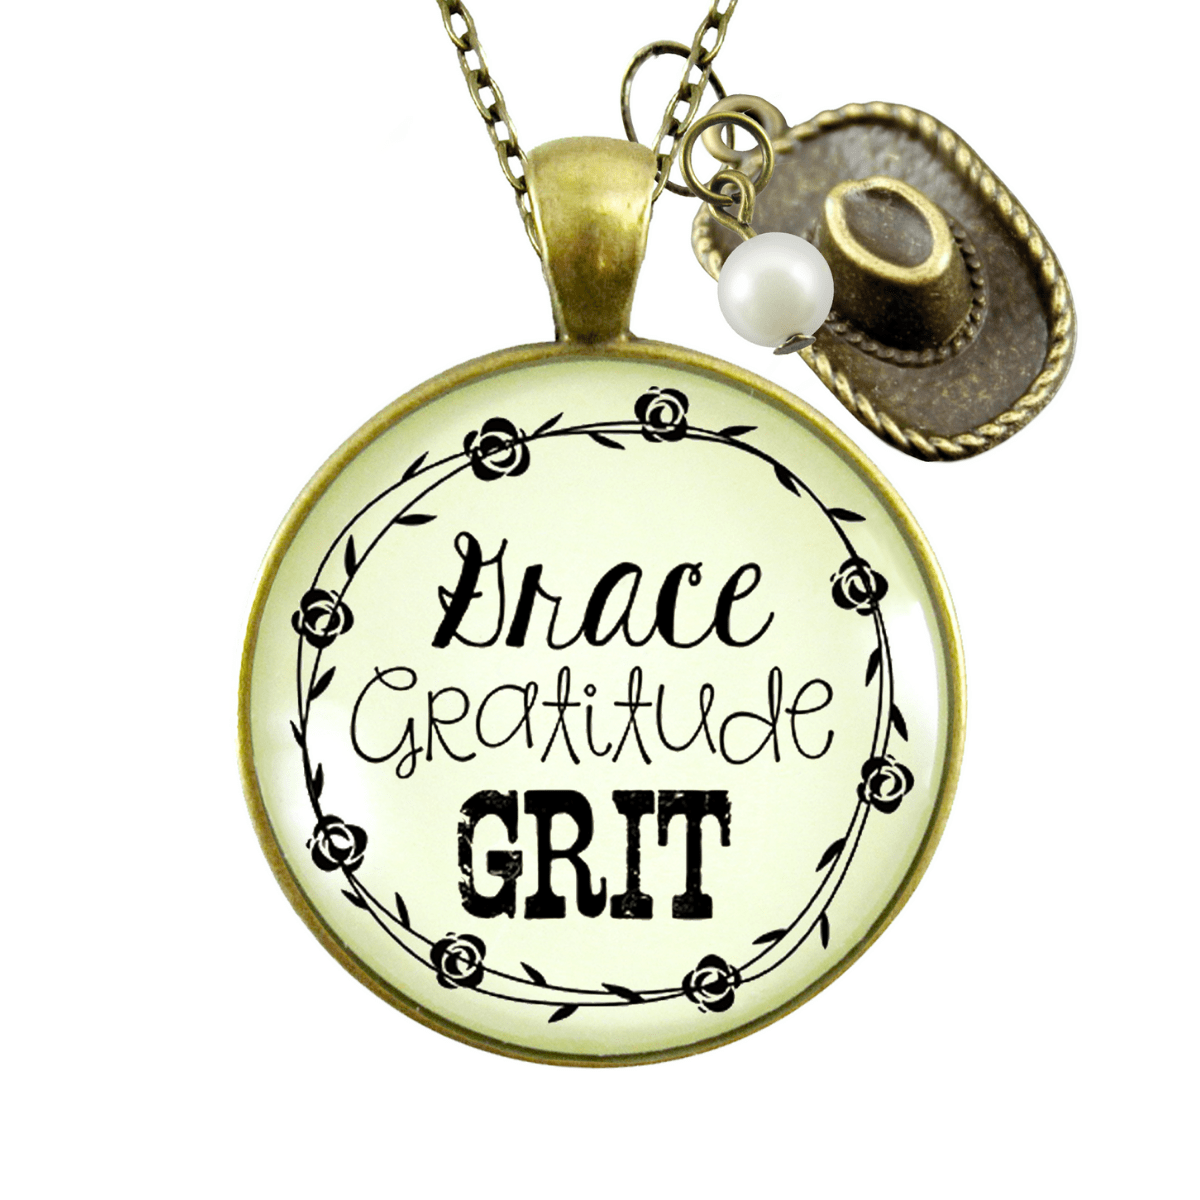 Gutsy Goodness Grace Gratitude Grit Country Necklace Western Cow Jewelry - Gutsy Goodness Handmade Jewelry;Grace Gratitude Grit Country Necklace Western Cow Jewelry - Gutsy Goodness Handmade Jewelry Gifts